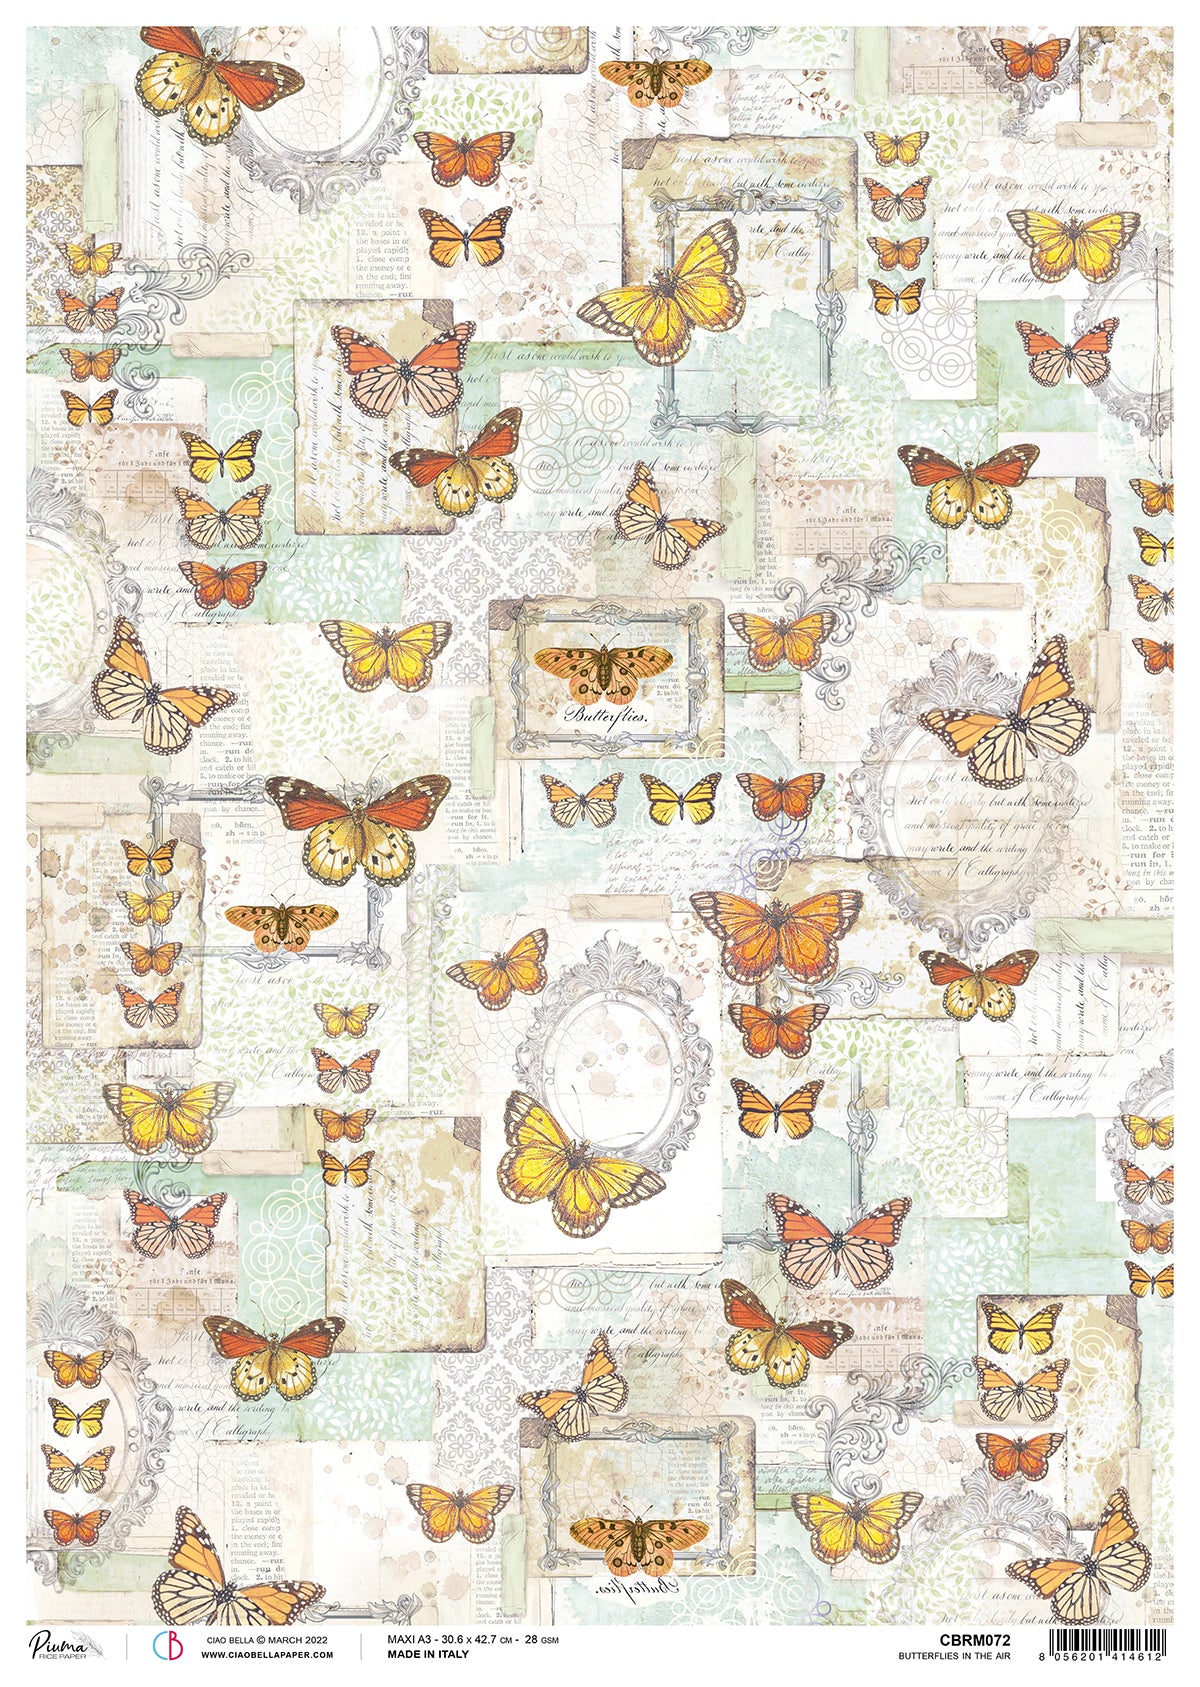 Ciao Bella Rice Paper A3 Piuma Butterflies In The Air - 3 Sheets